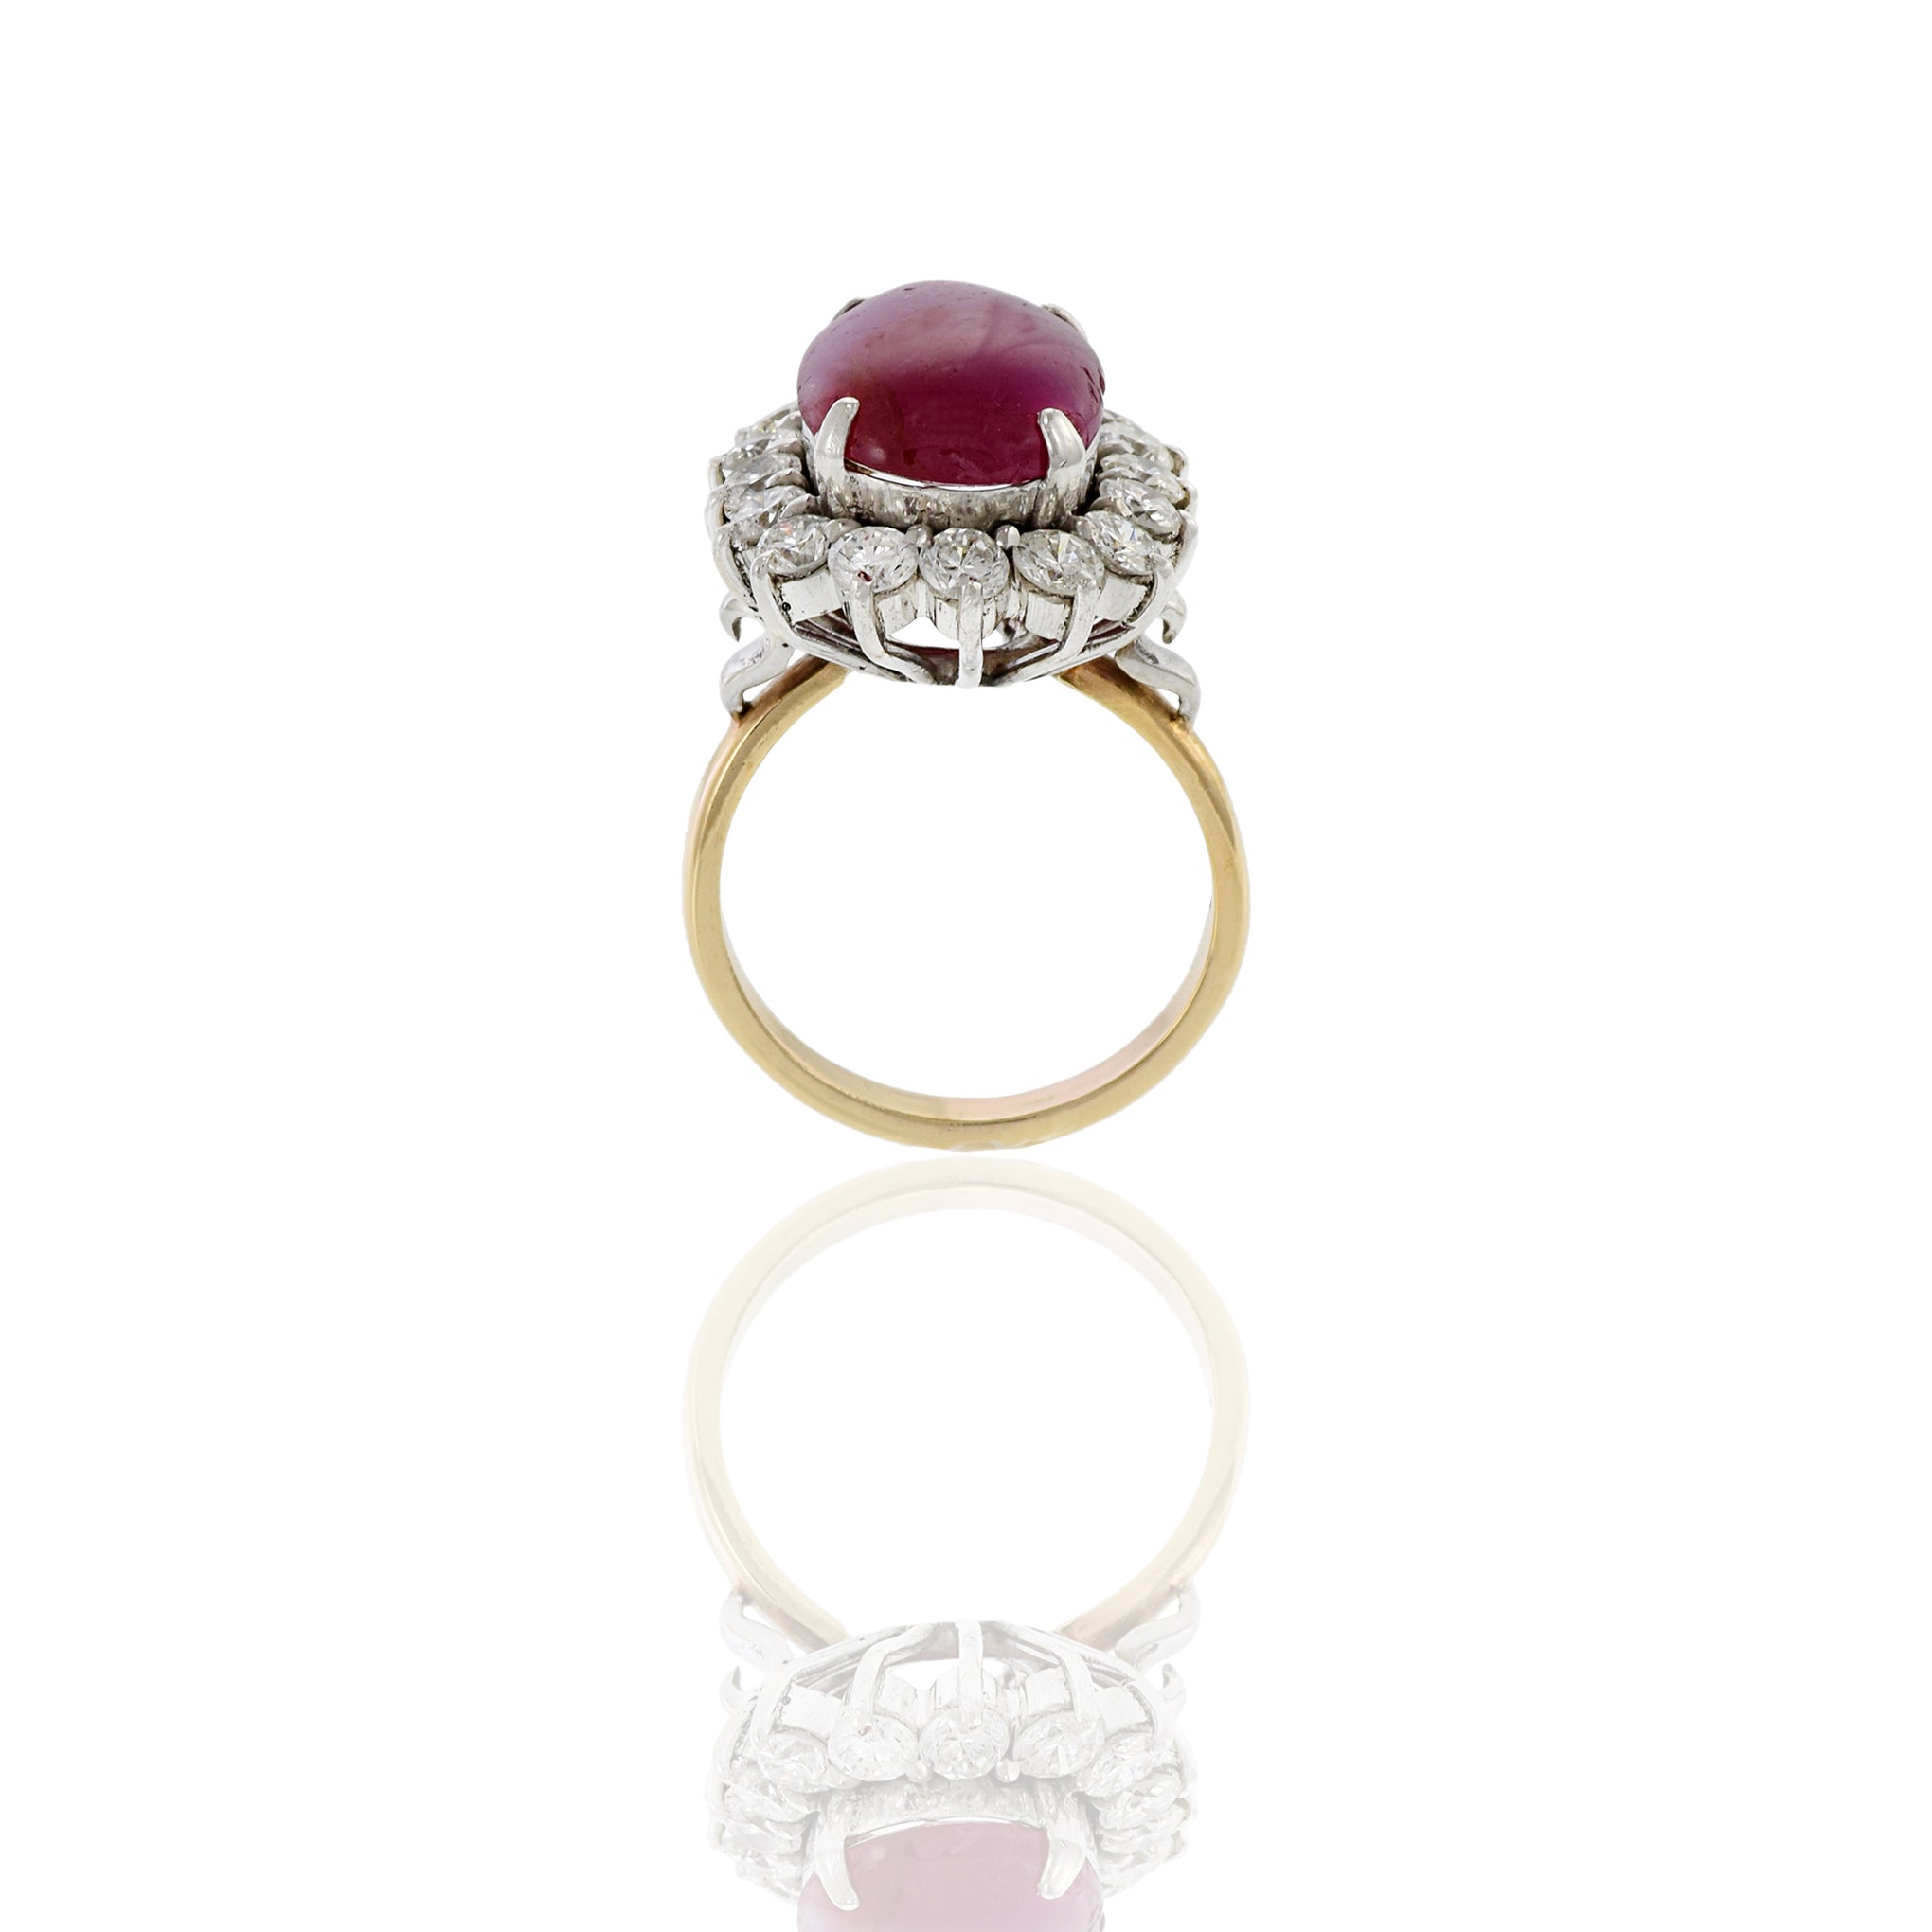 Vintage 14KT Yellow Gold Ruby And Diamond Ring